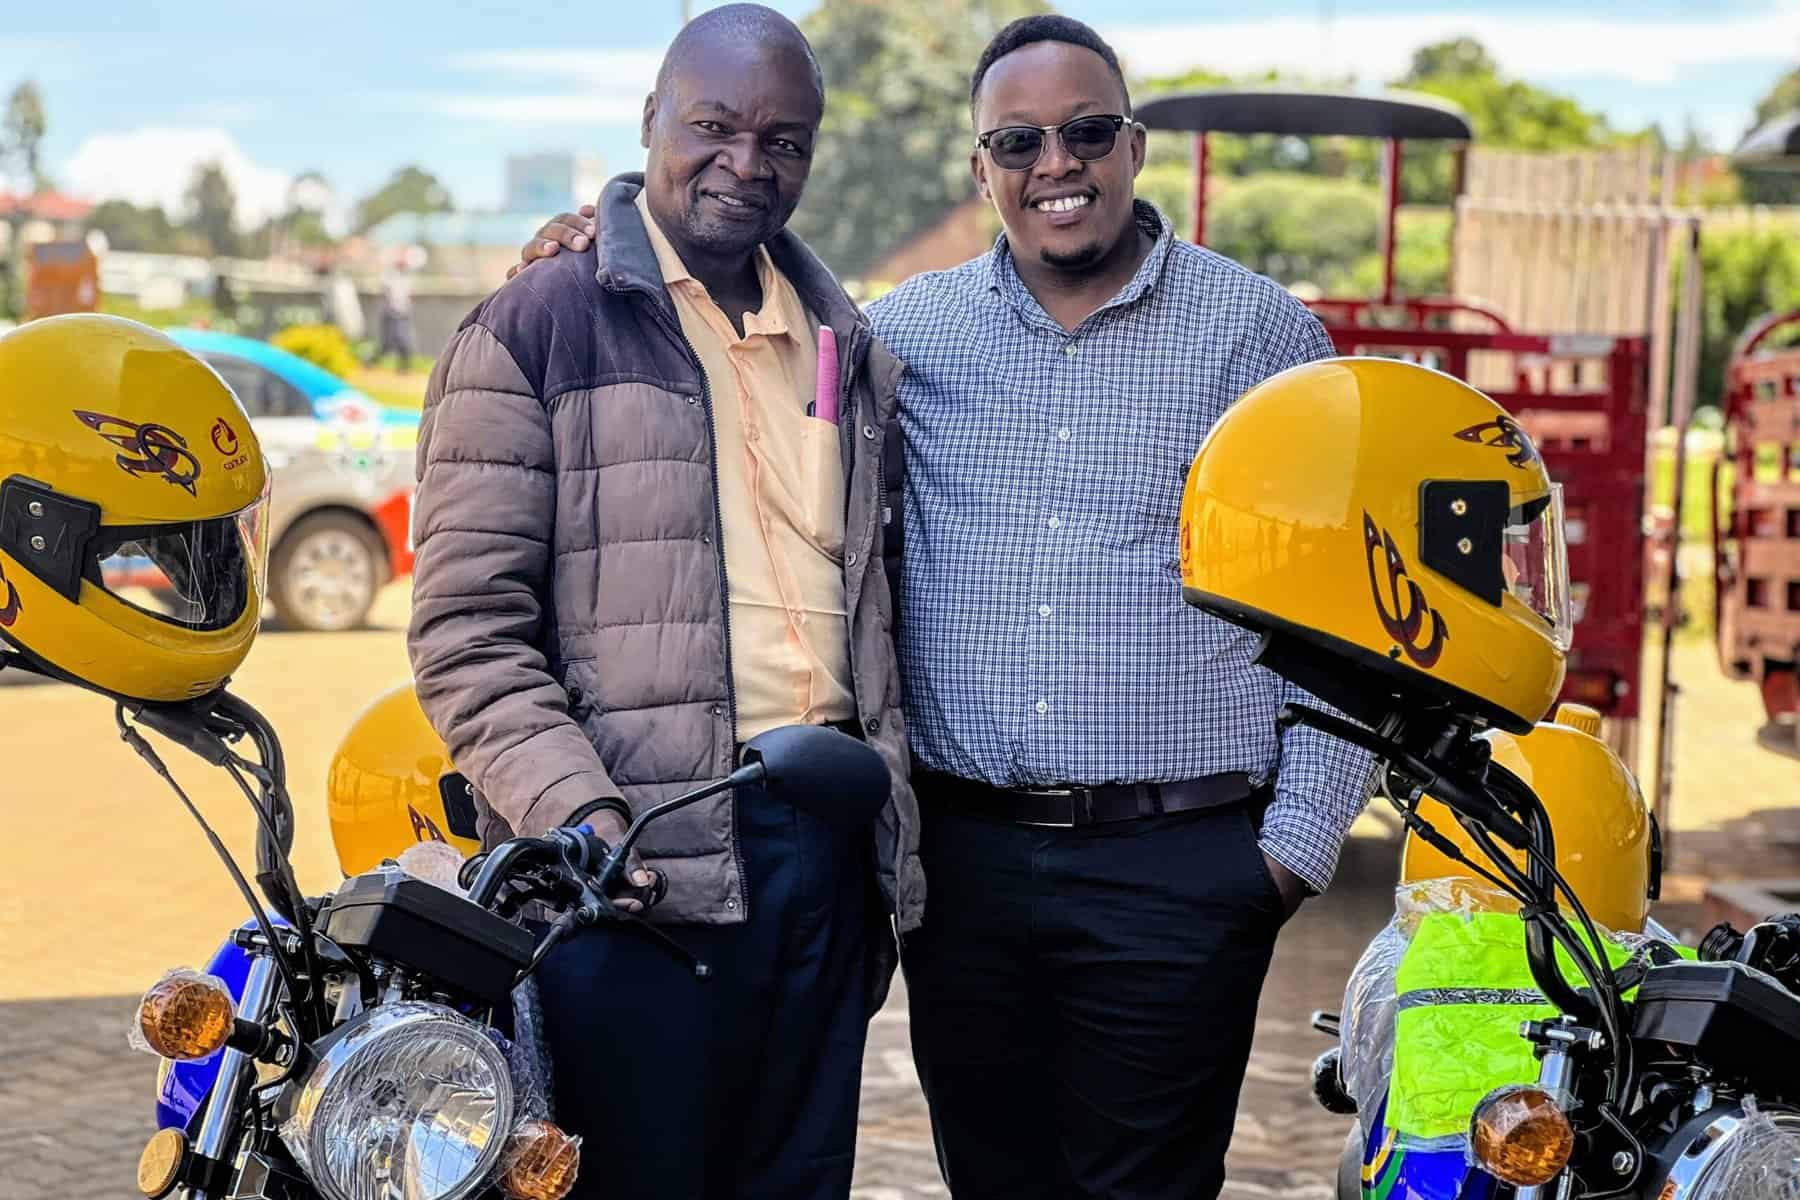 Two smiling men standing next to new yellow motorbikes, representing the generous donation that aids pastors in their community work.